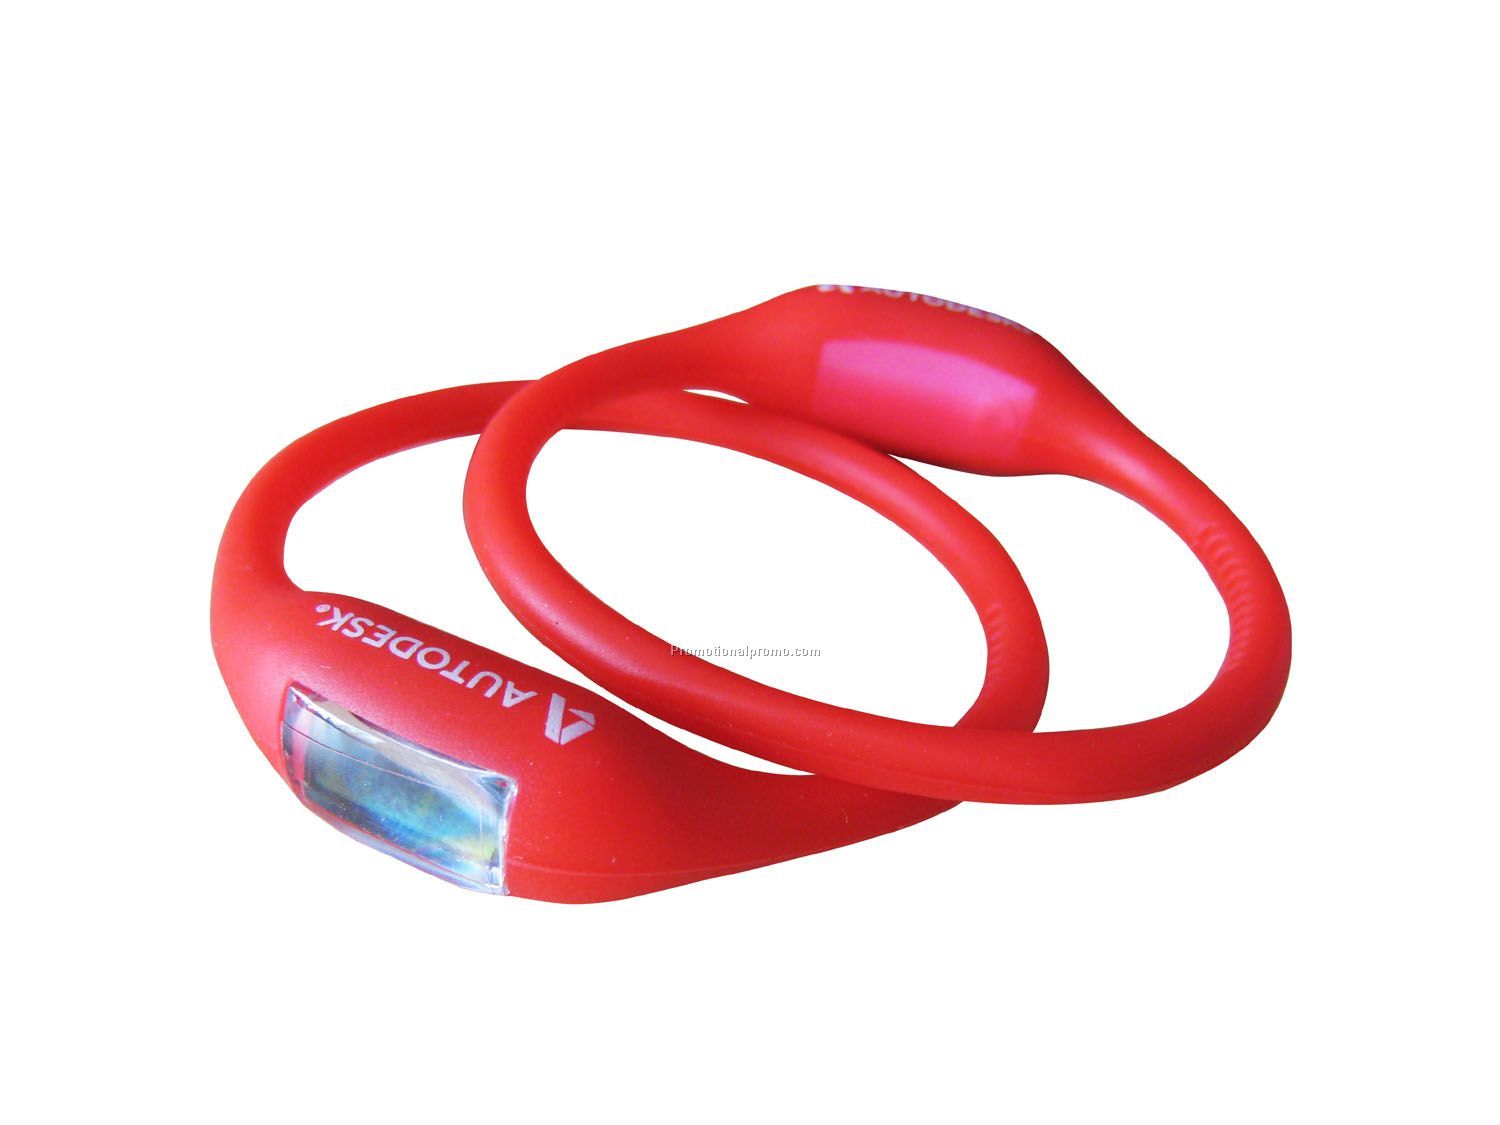 Promotional Silicone Braclet Pedometer